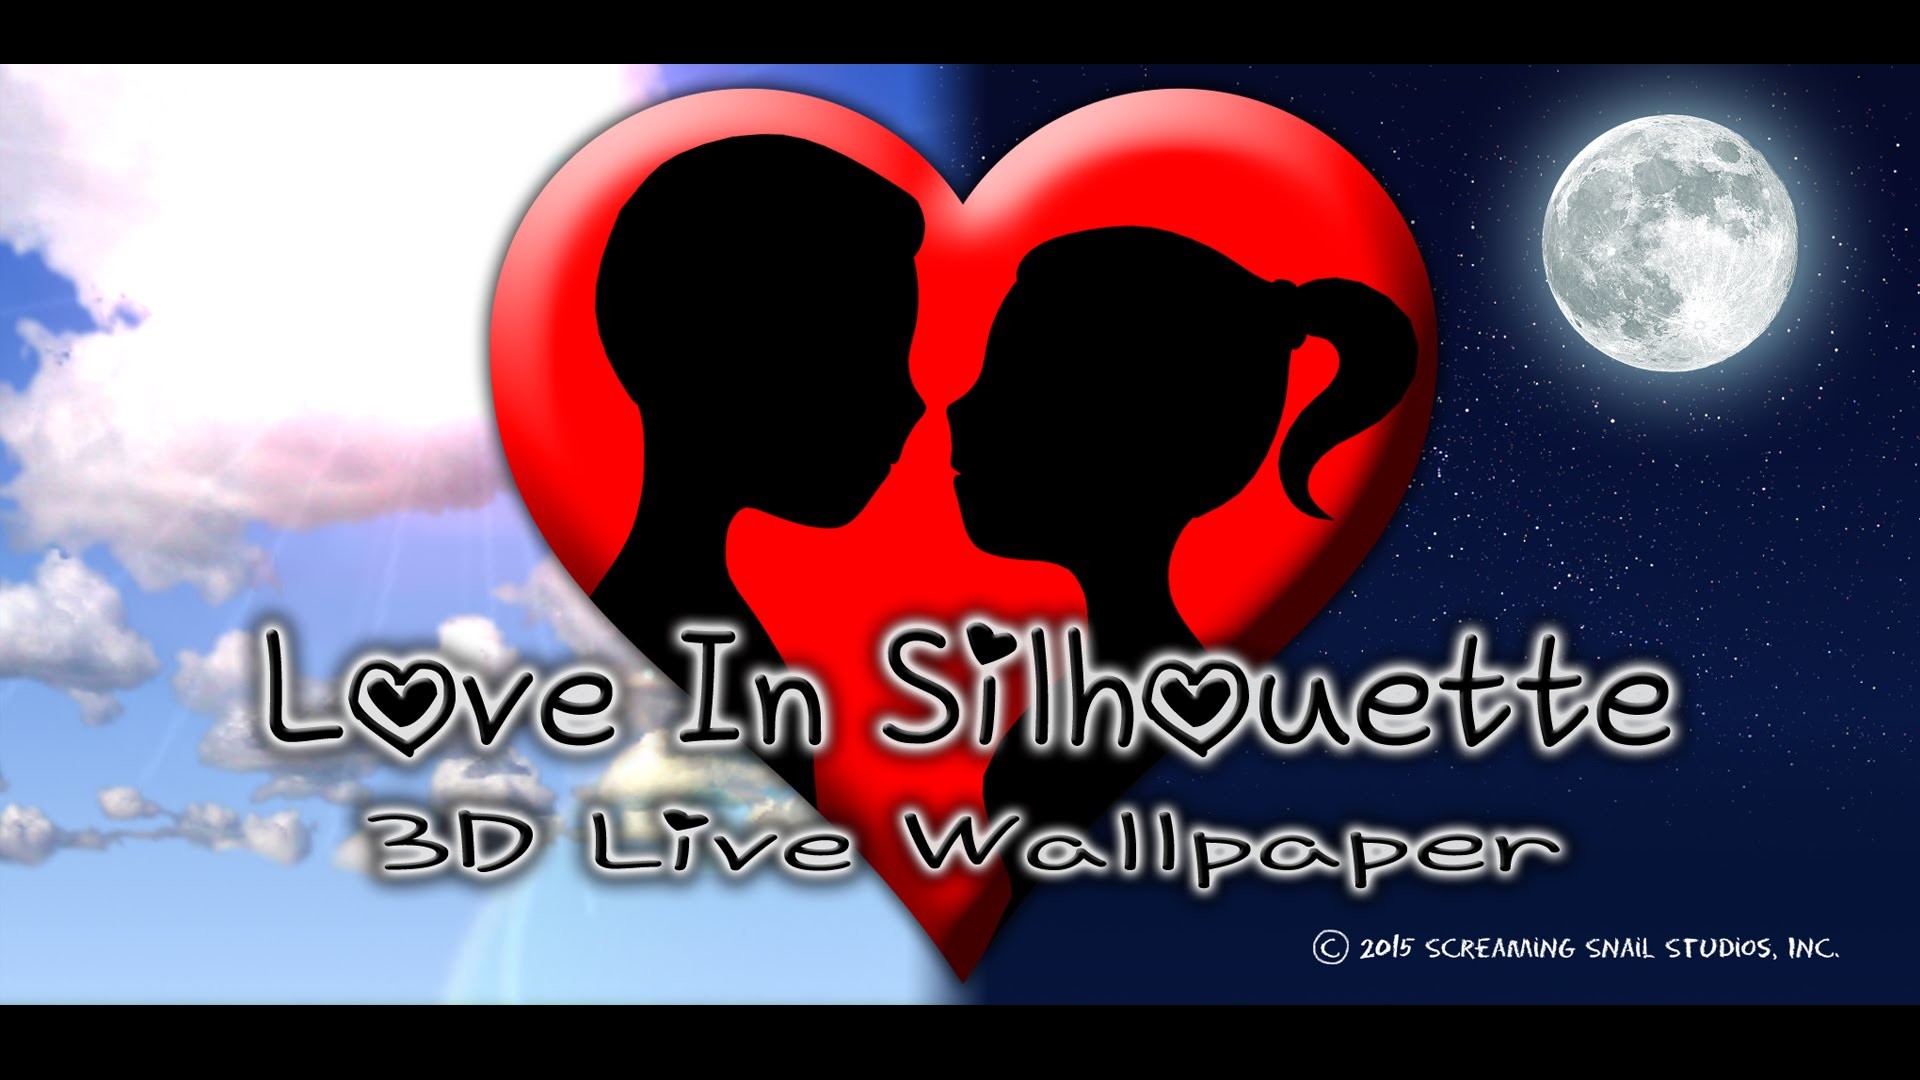 Love In Silhouette 3D Live Wallpaper for Android